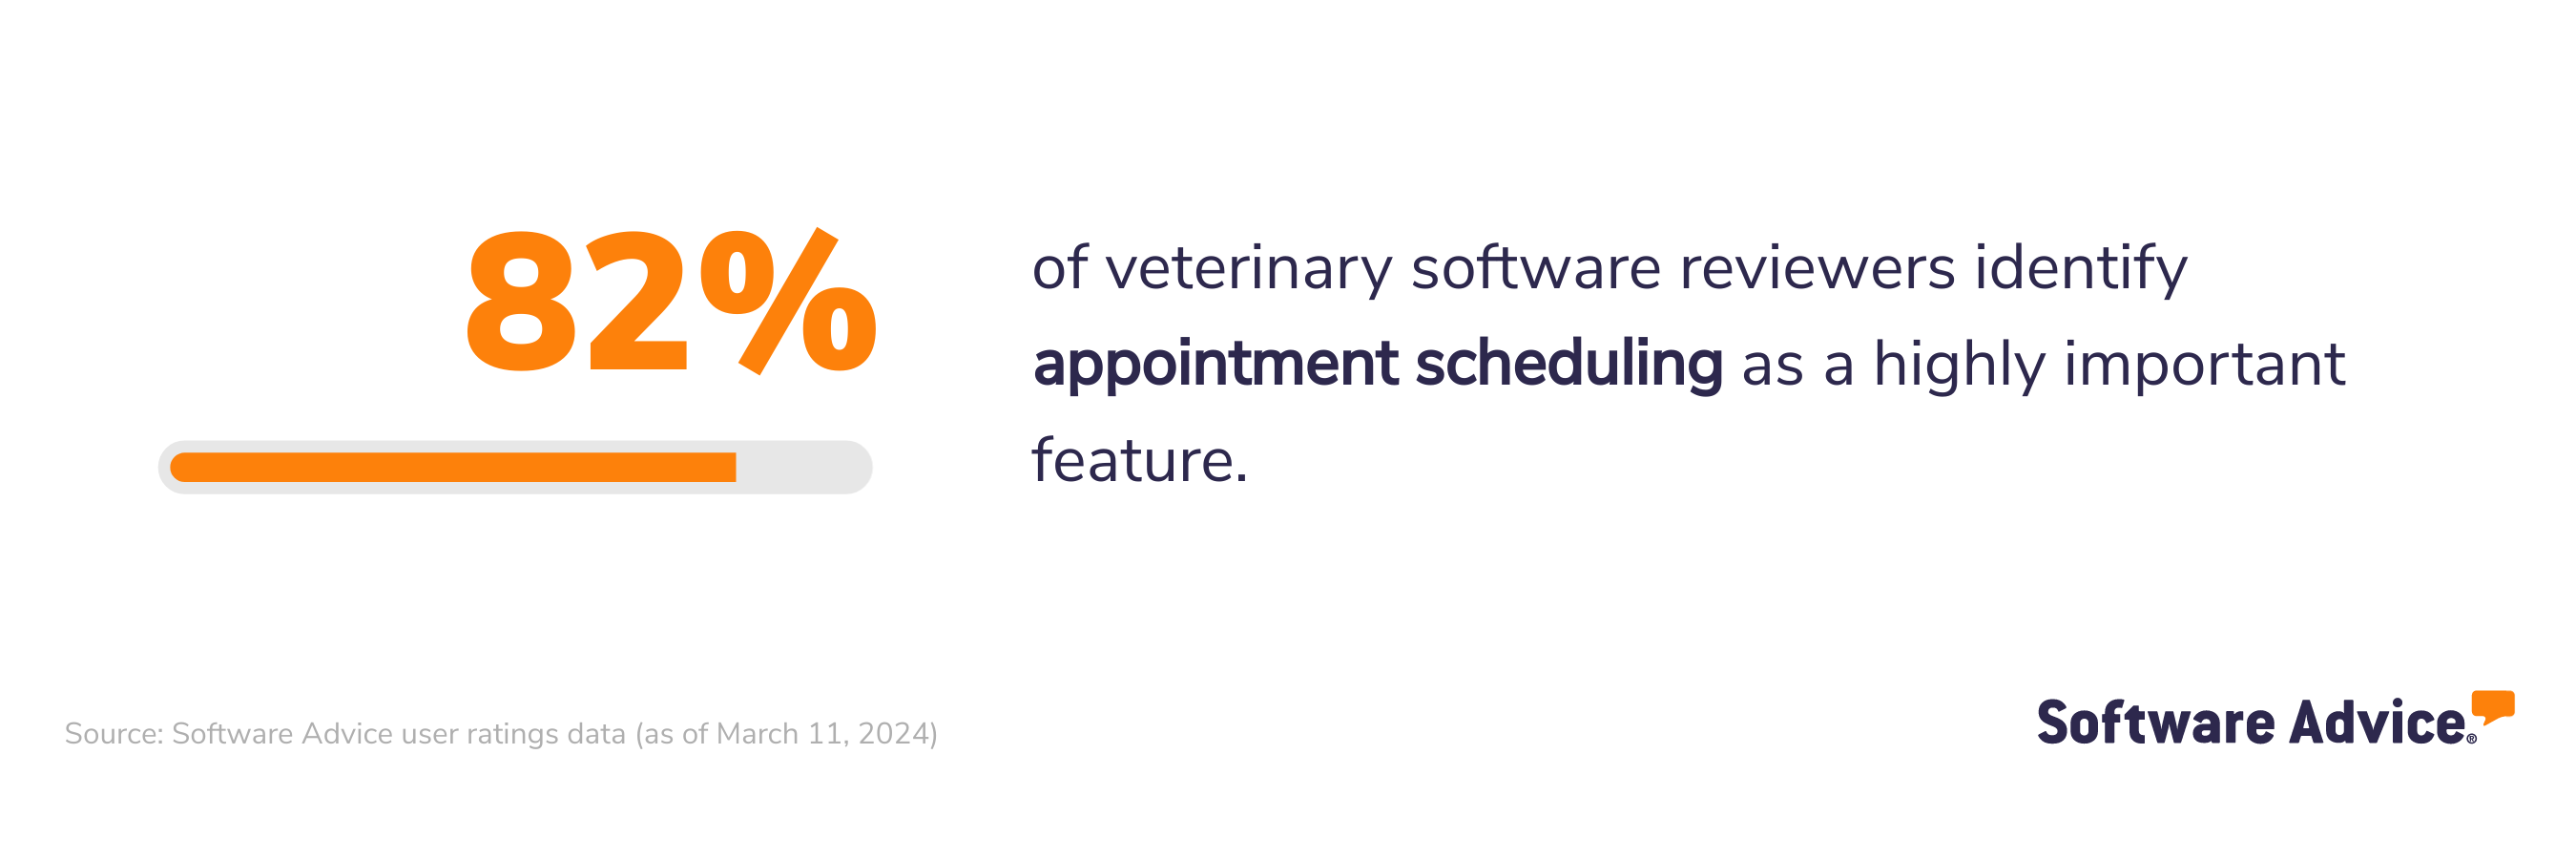 82% of veterinary software reviewers identify appointment scheduling as a highly important feature.